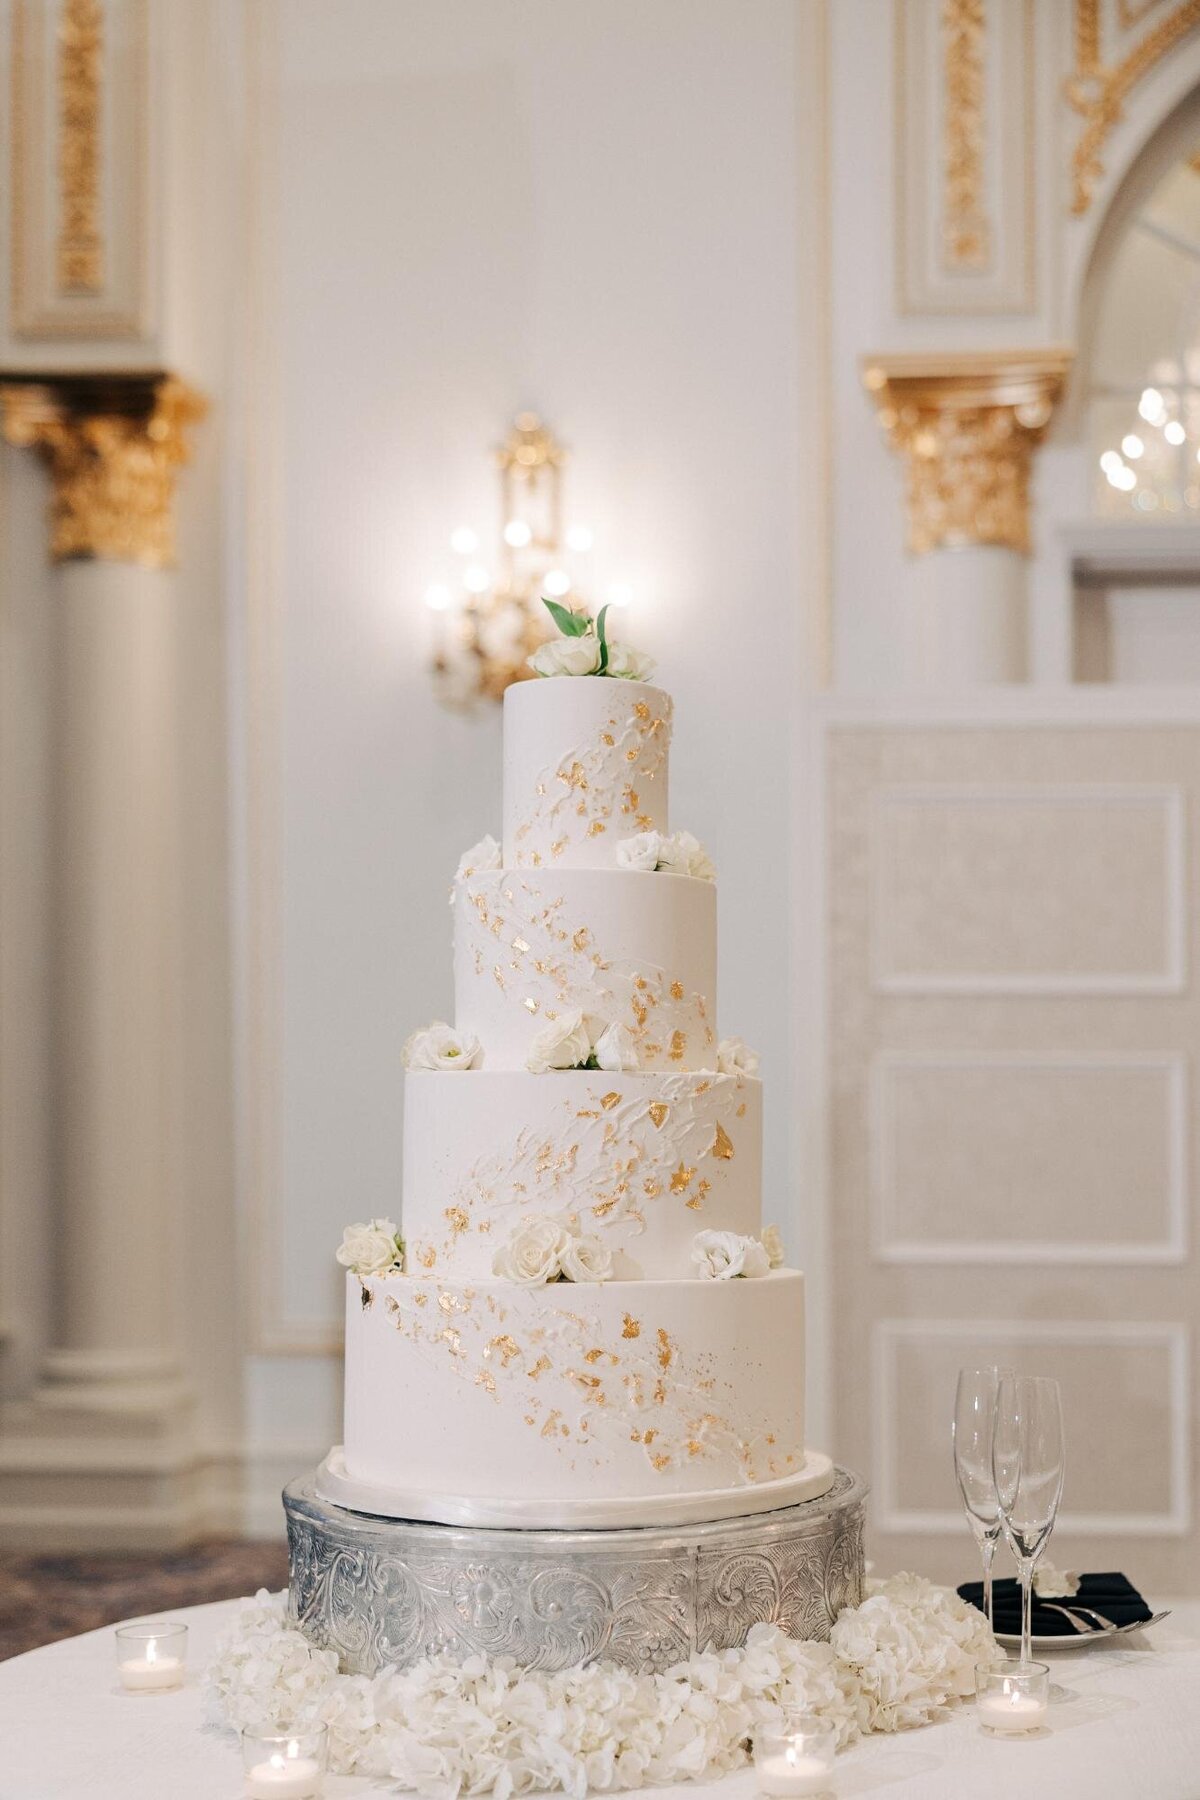 Elegant multi-tiered wedding cake with gold leaf accents on a silver stand, surrounded by candles and white flowers in a luxurious interior.